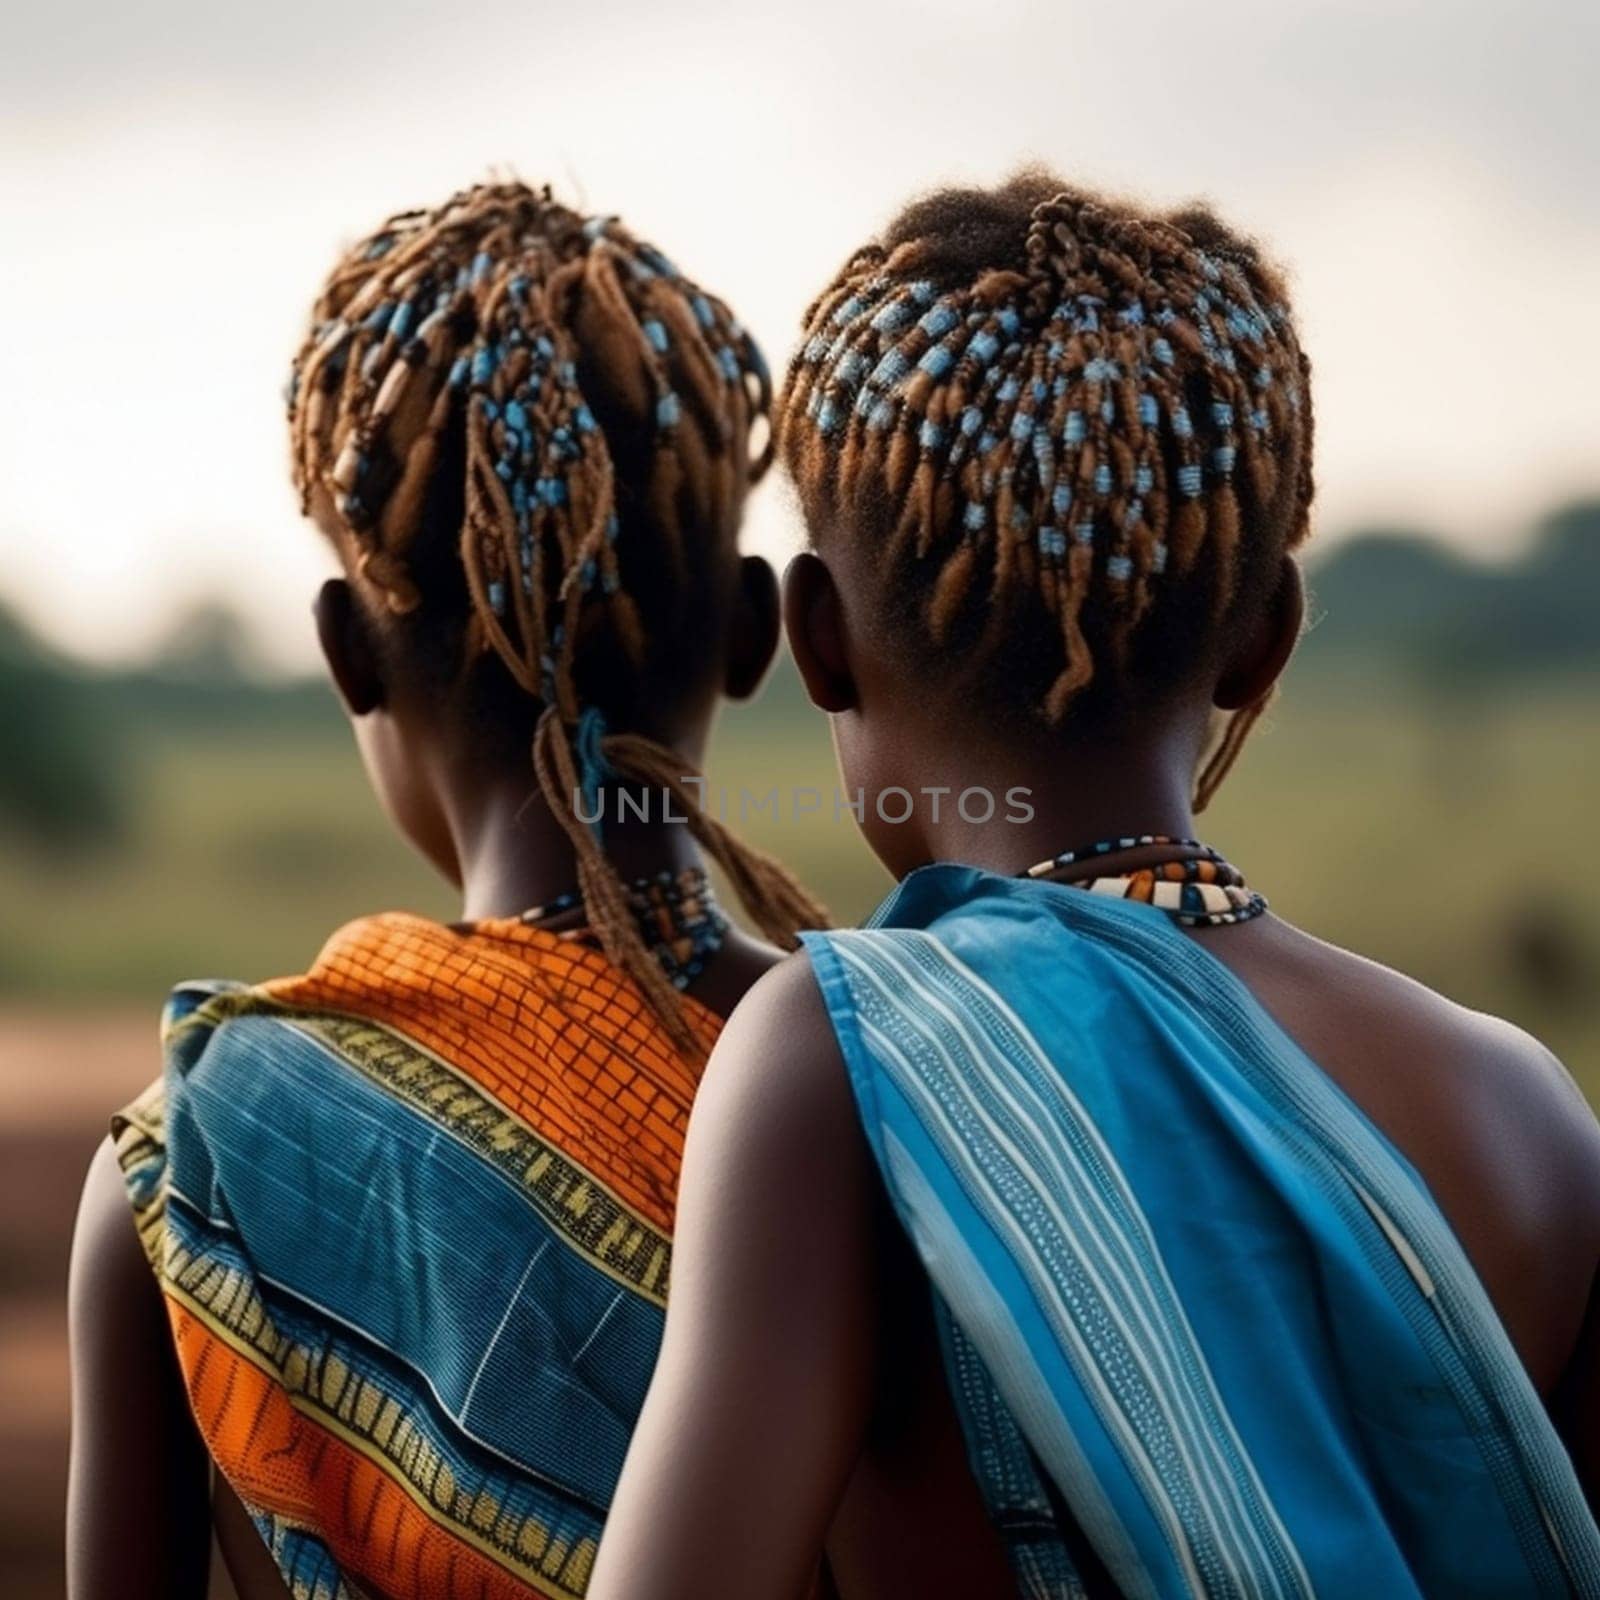 two African girls in national clothes view from the back against the backdrop of nature in the background High quality image